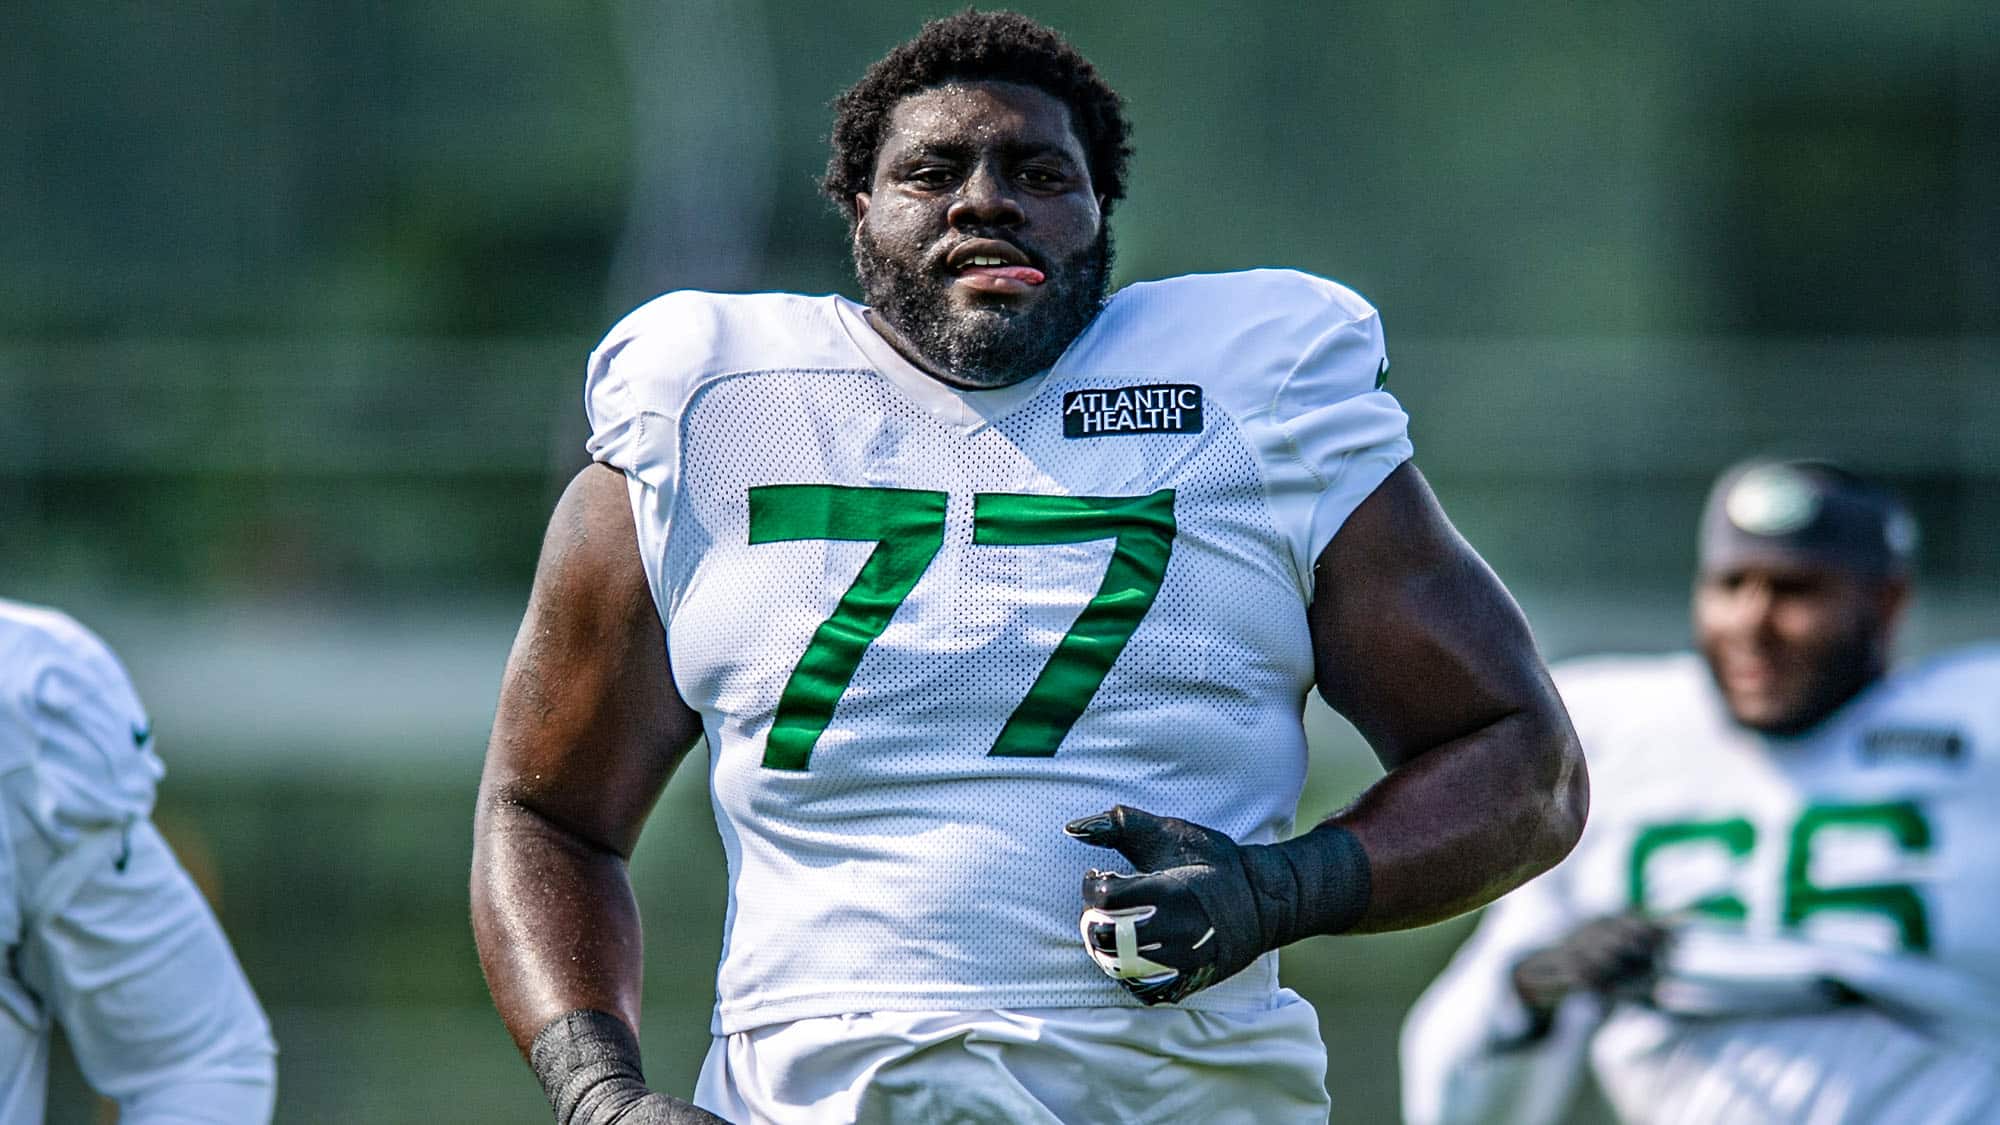 NY Jets left tackle Mekhi Becton has a 2021 schedule that favors his skill set.